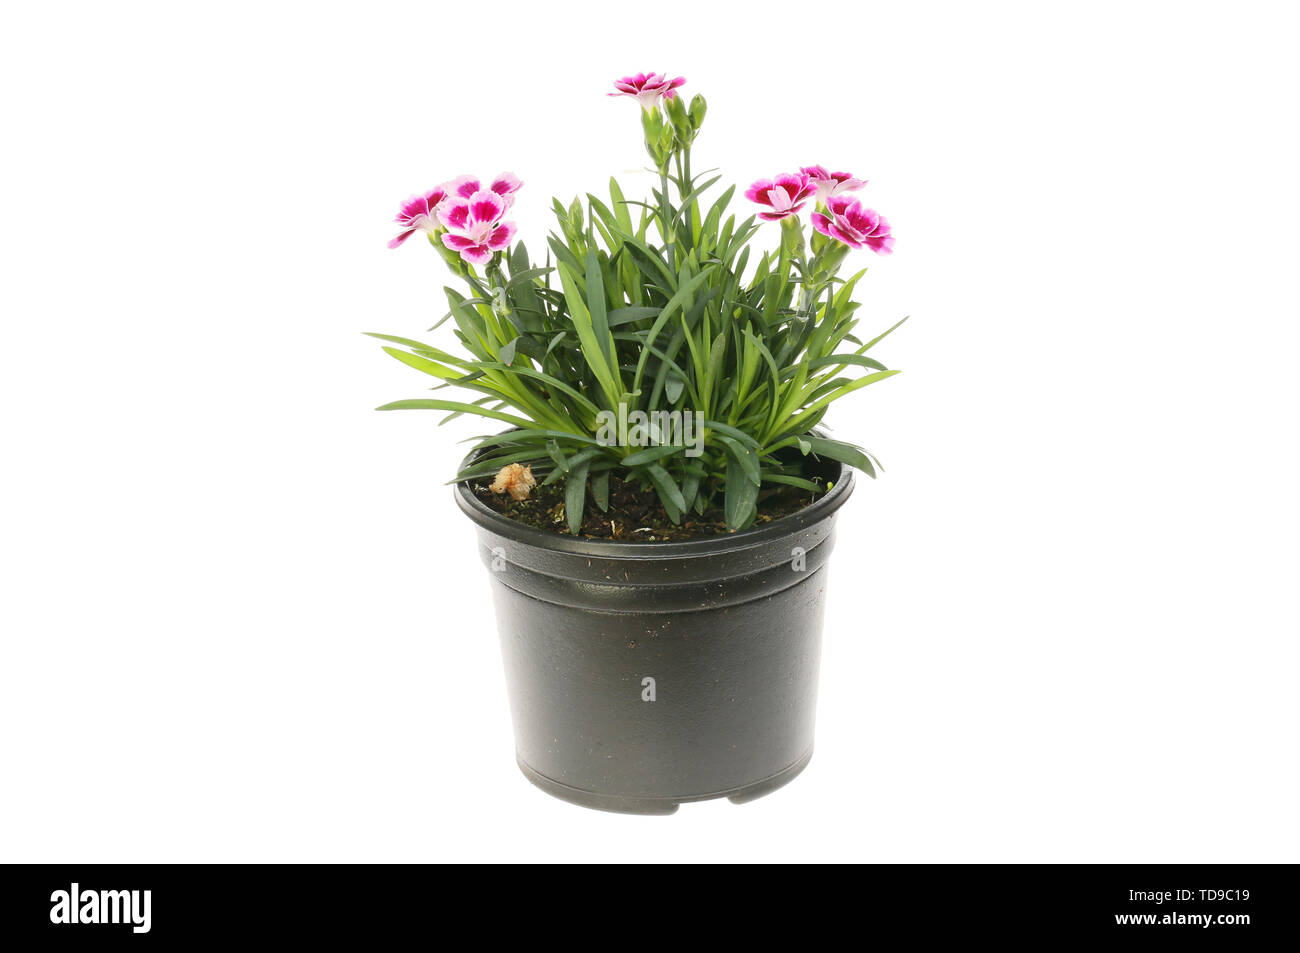 Flowering dianthus plant in a pot isolated against white Stock Photo